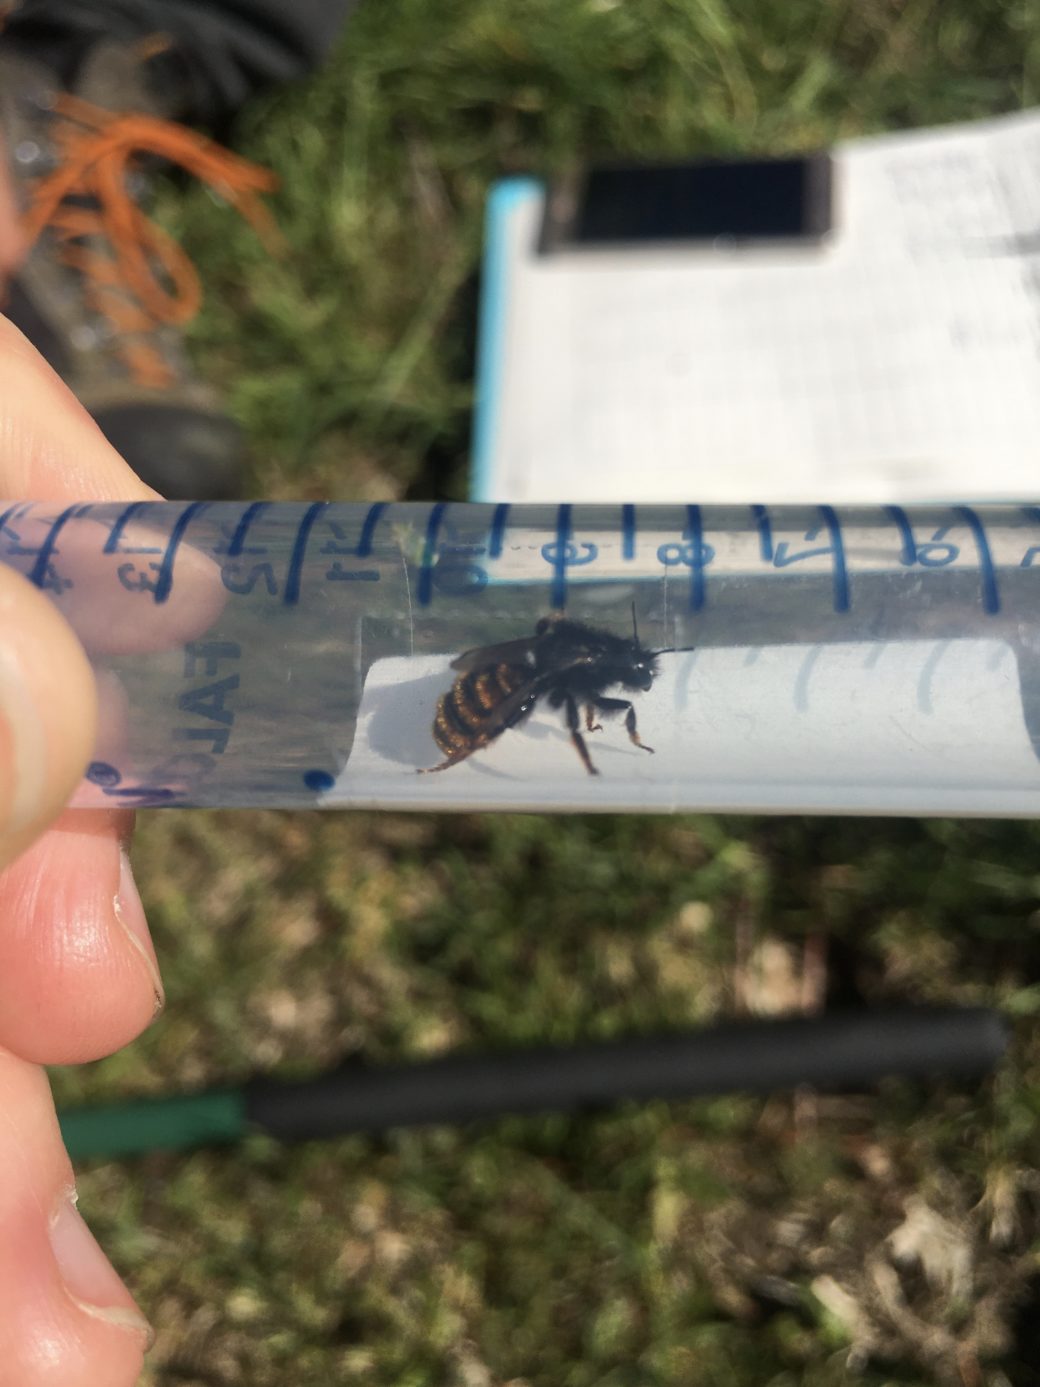 Picture: The photo shows a captured, living mason bee in a transparent plastic tube with blue printed graduations, which is held horizontally in front of the camera. In the background meadow soil can be seen.